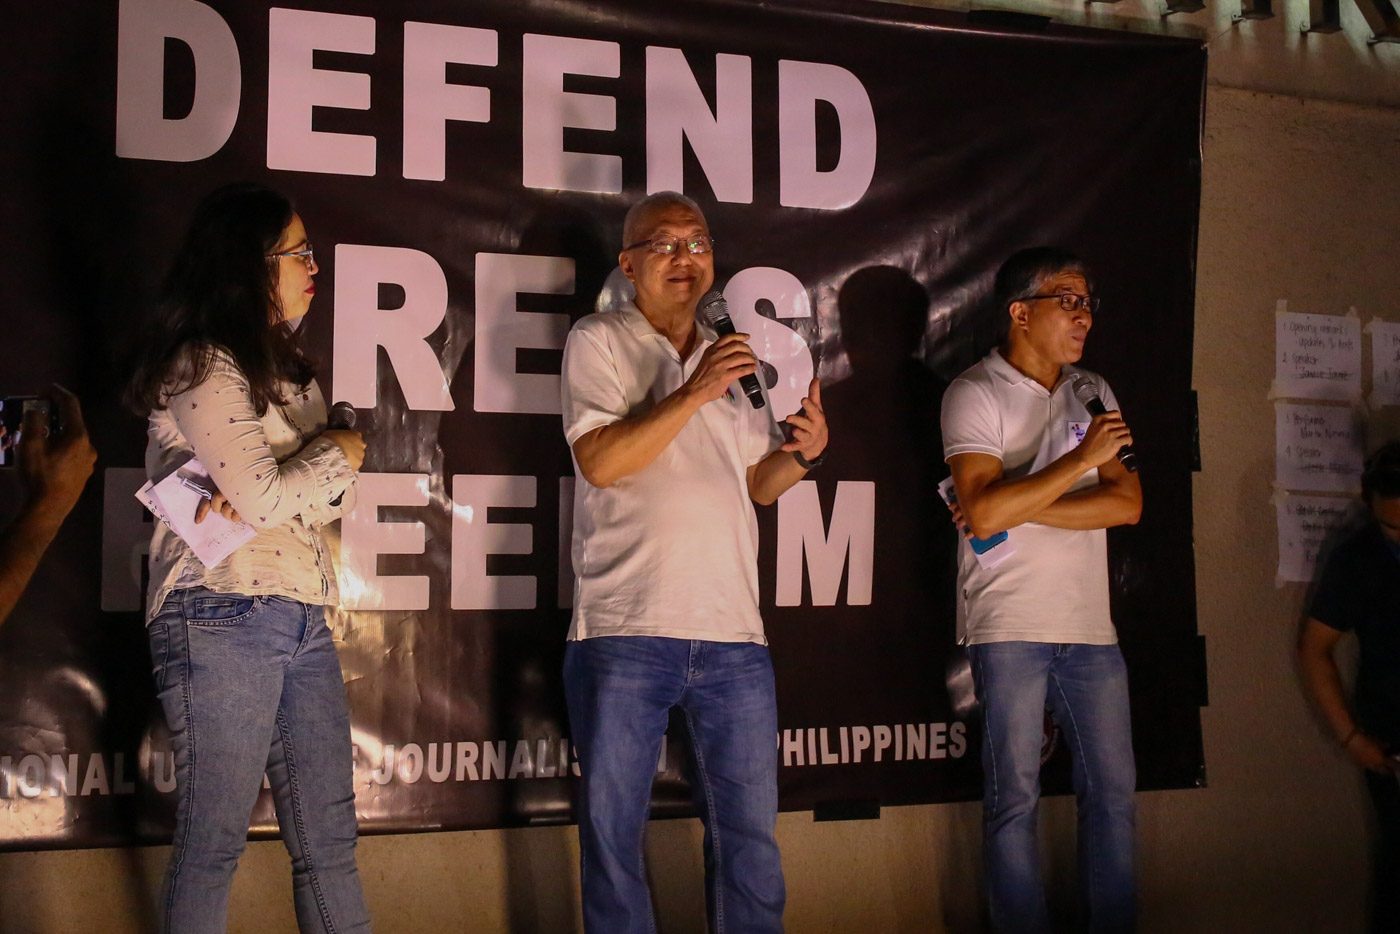 LOOK: Ricky Lee, Yeng Constantino join other artists in ABS-CBN’s Friday protest